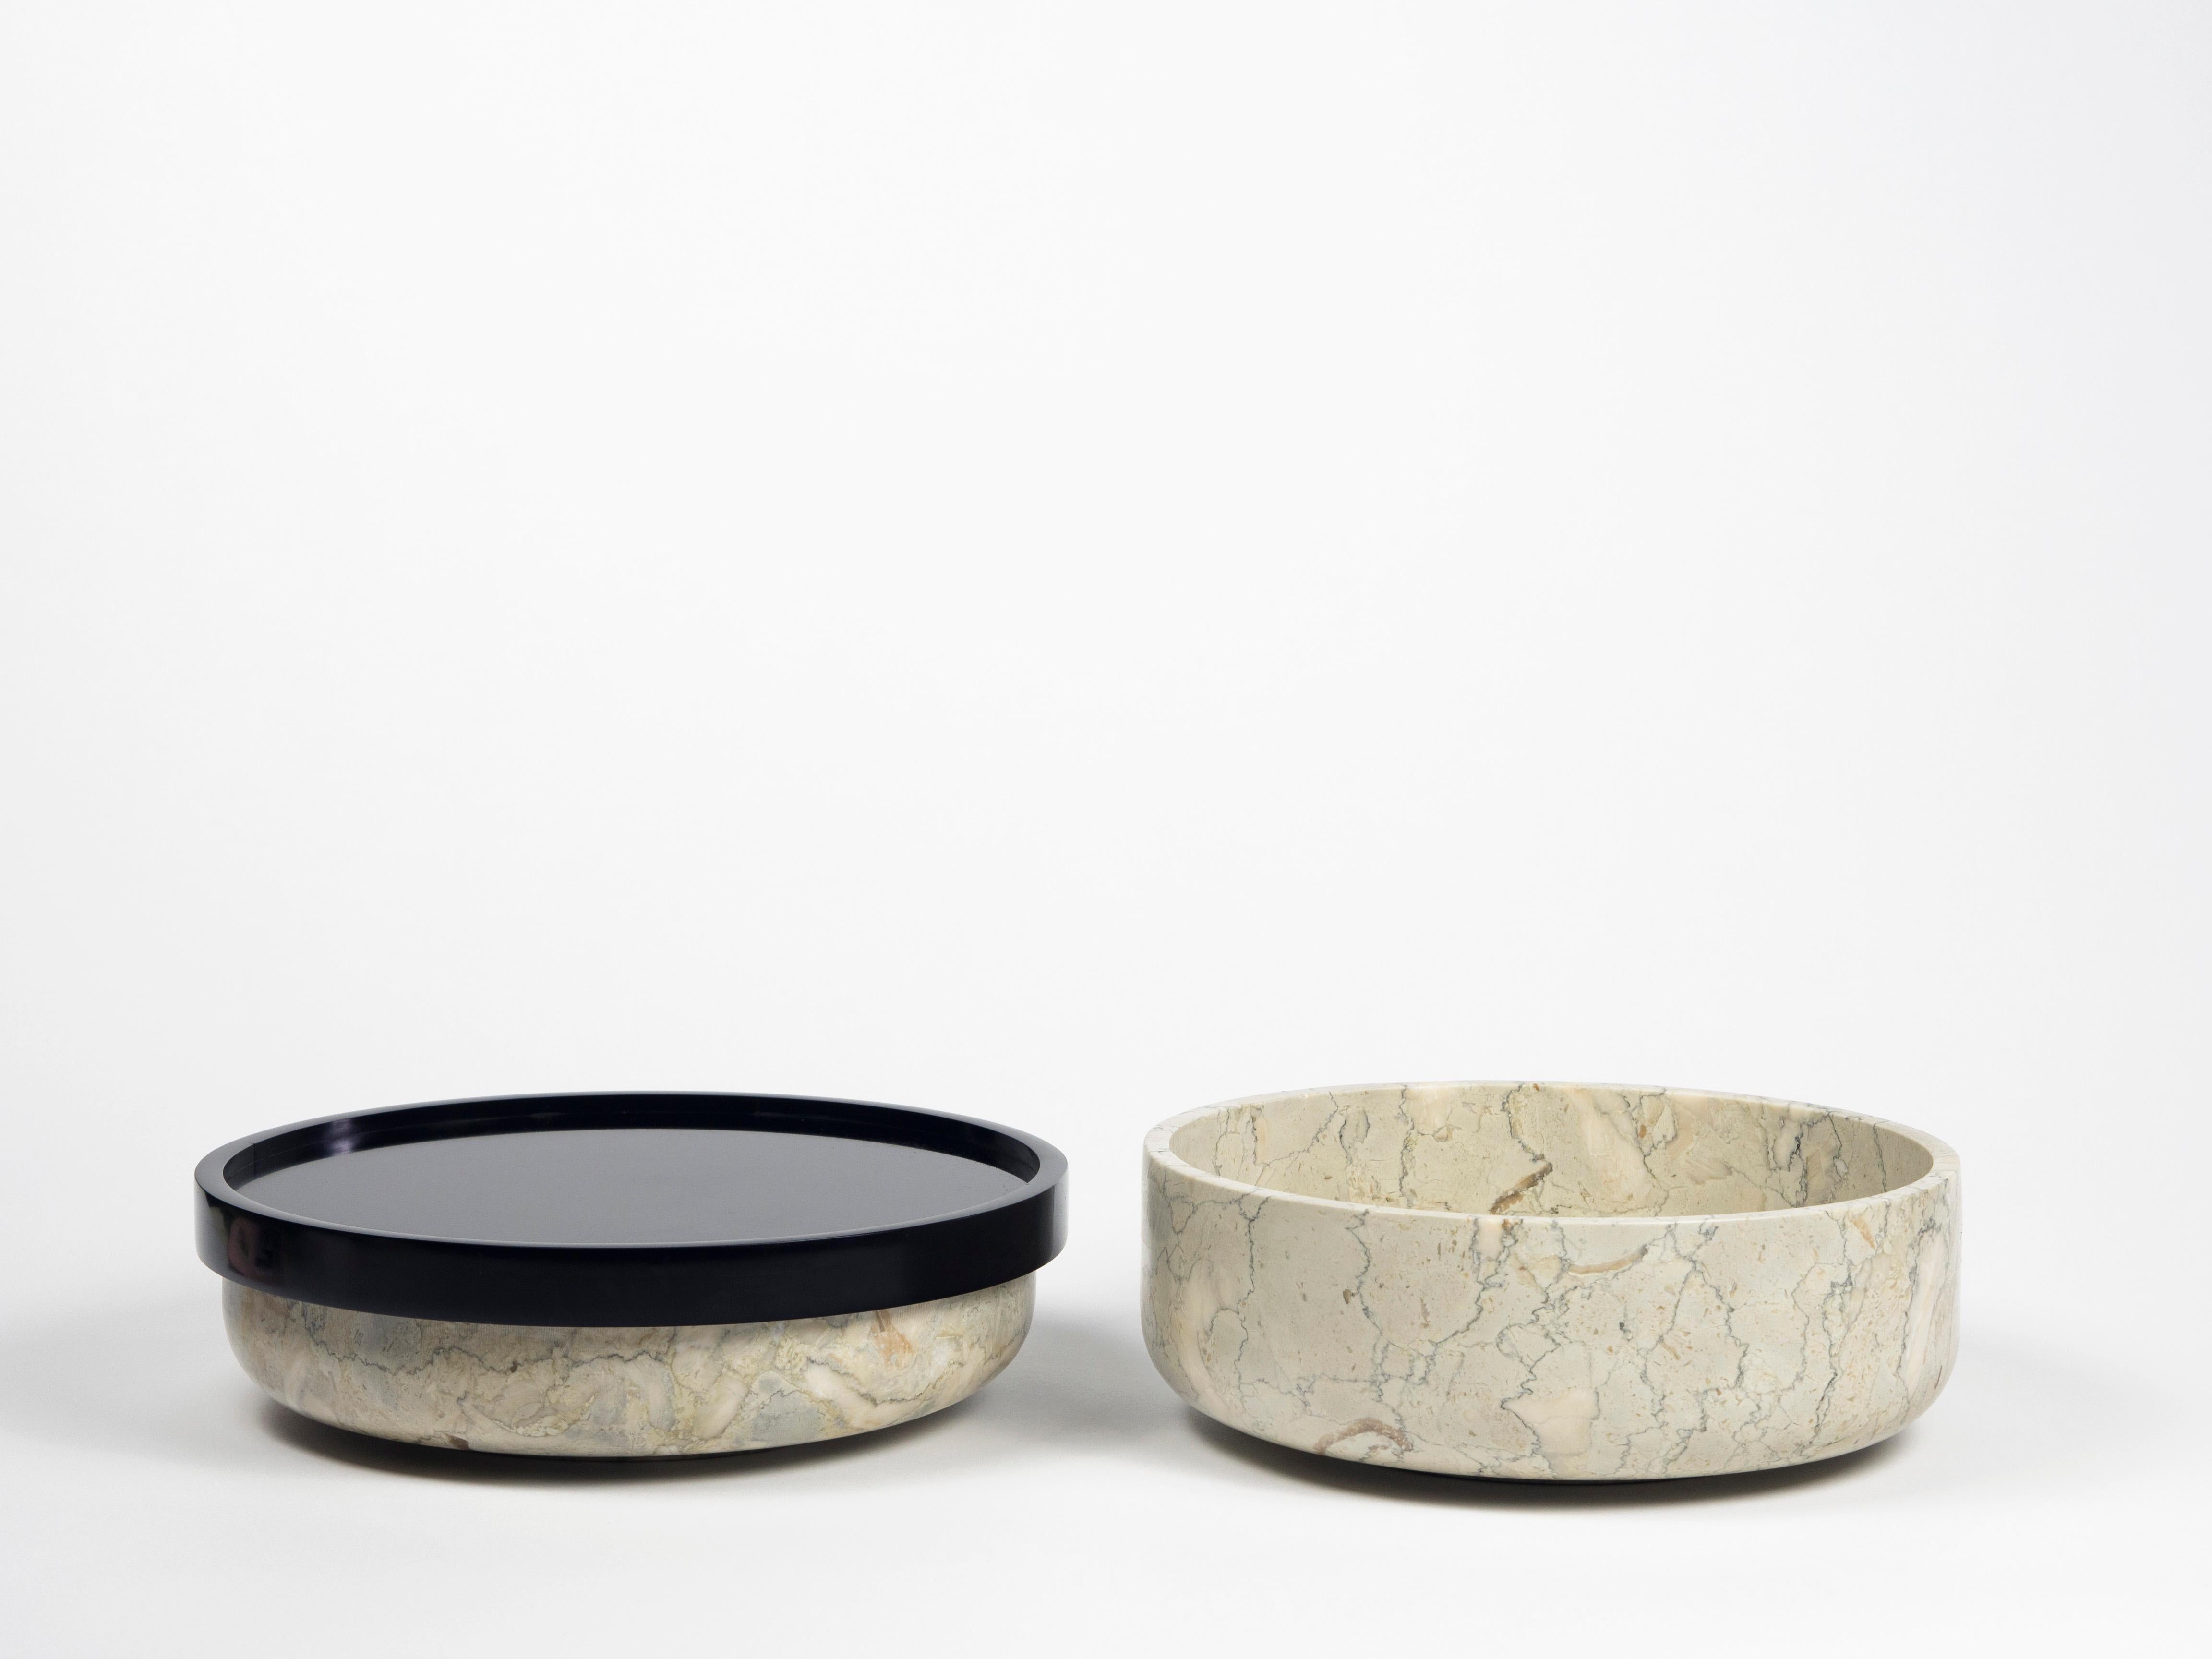 A collection of marble containers made up of 2 elements and held together by a Corian element designed for everyday domestic life and ready to welcome and offer hospitality. Versatile objects that adapt to multiple uses, from simple containers for